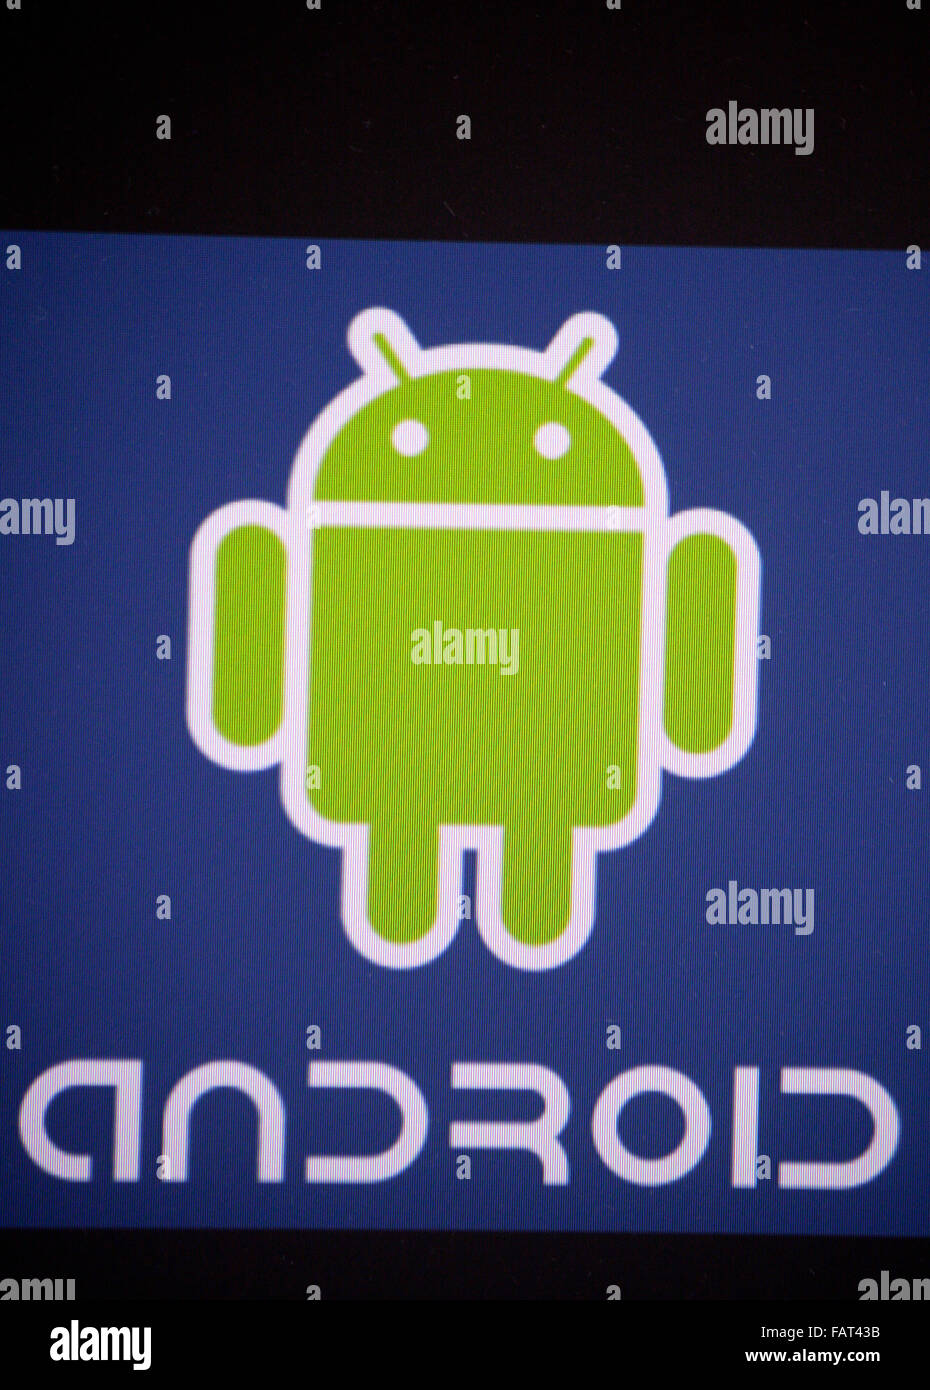 Markenname: 'Android', Berlin. Stock Photo